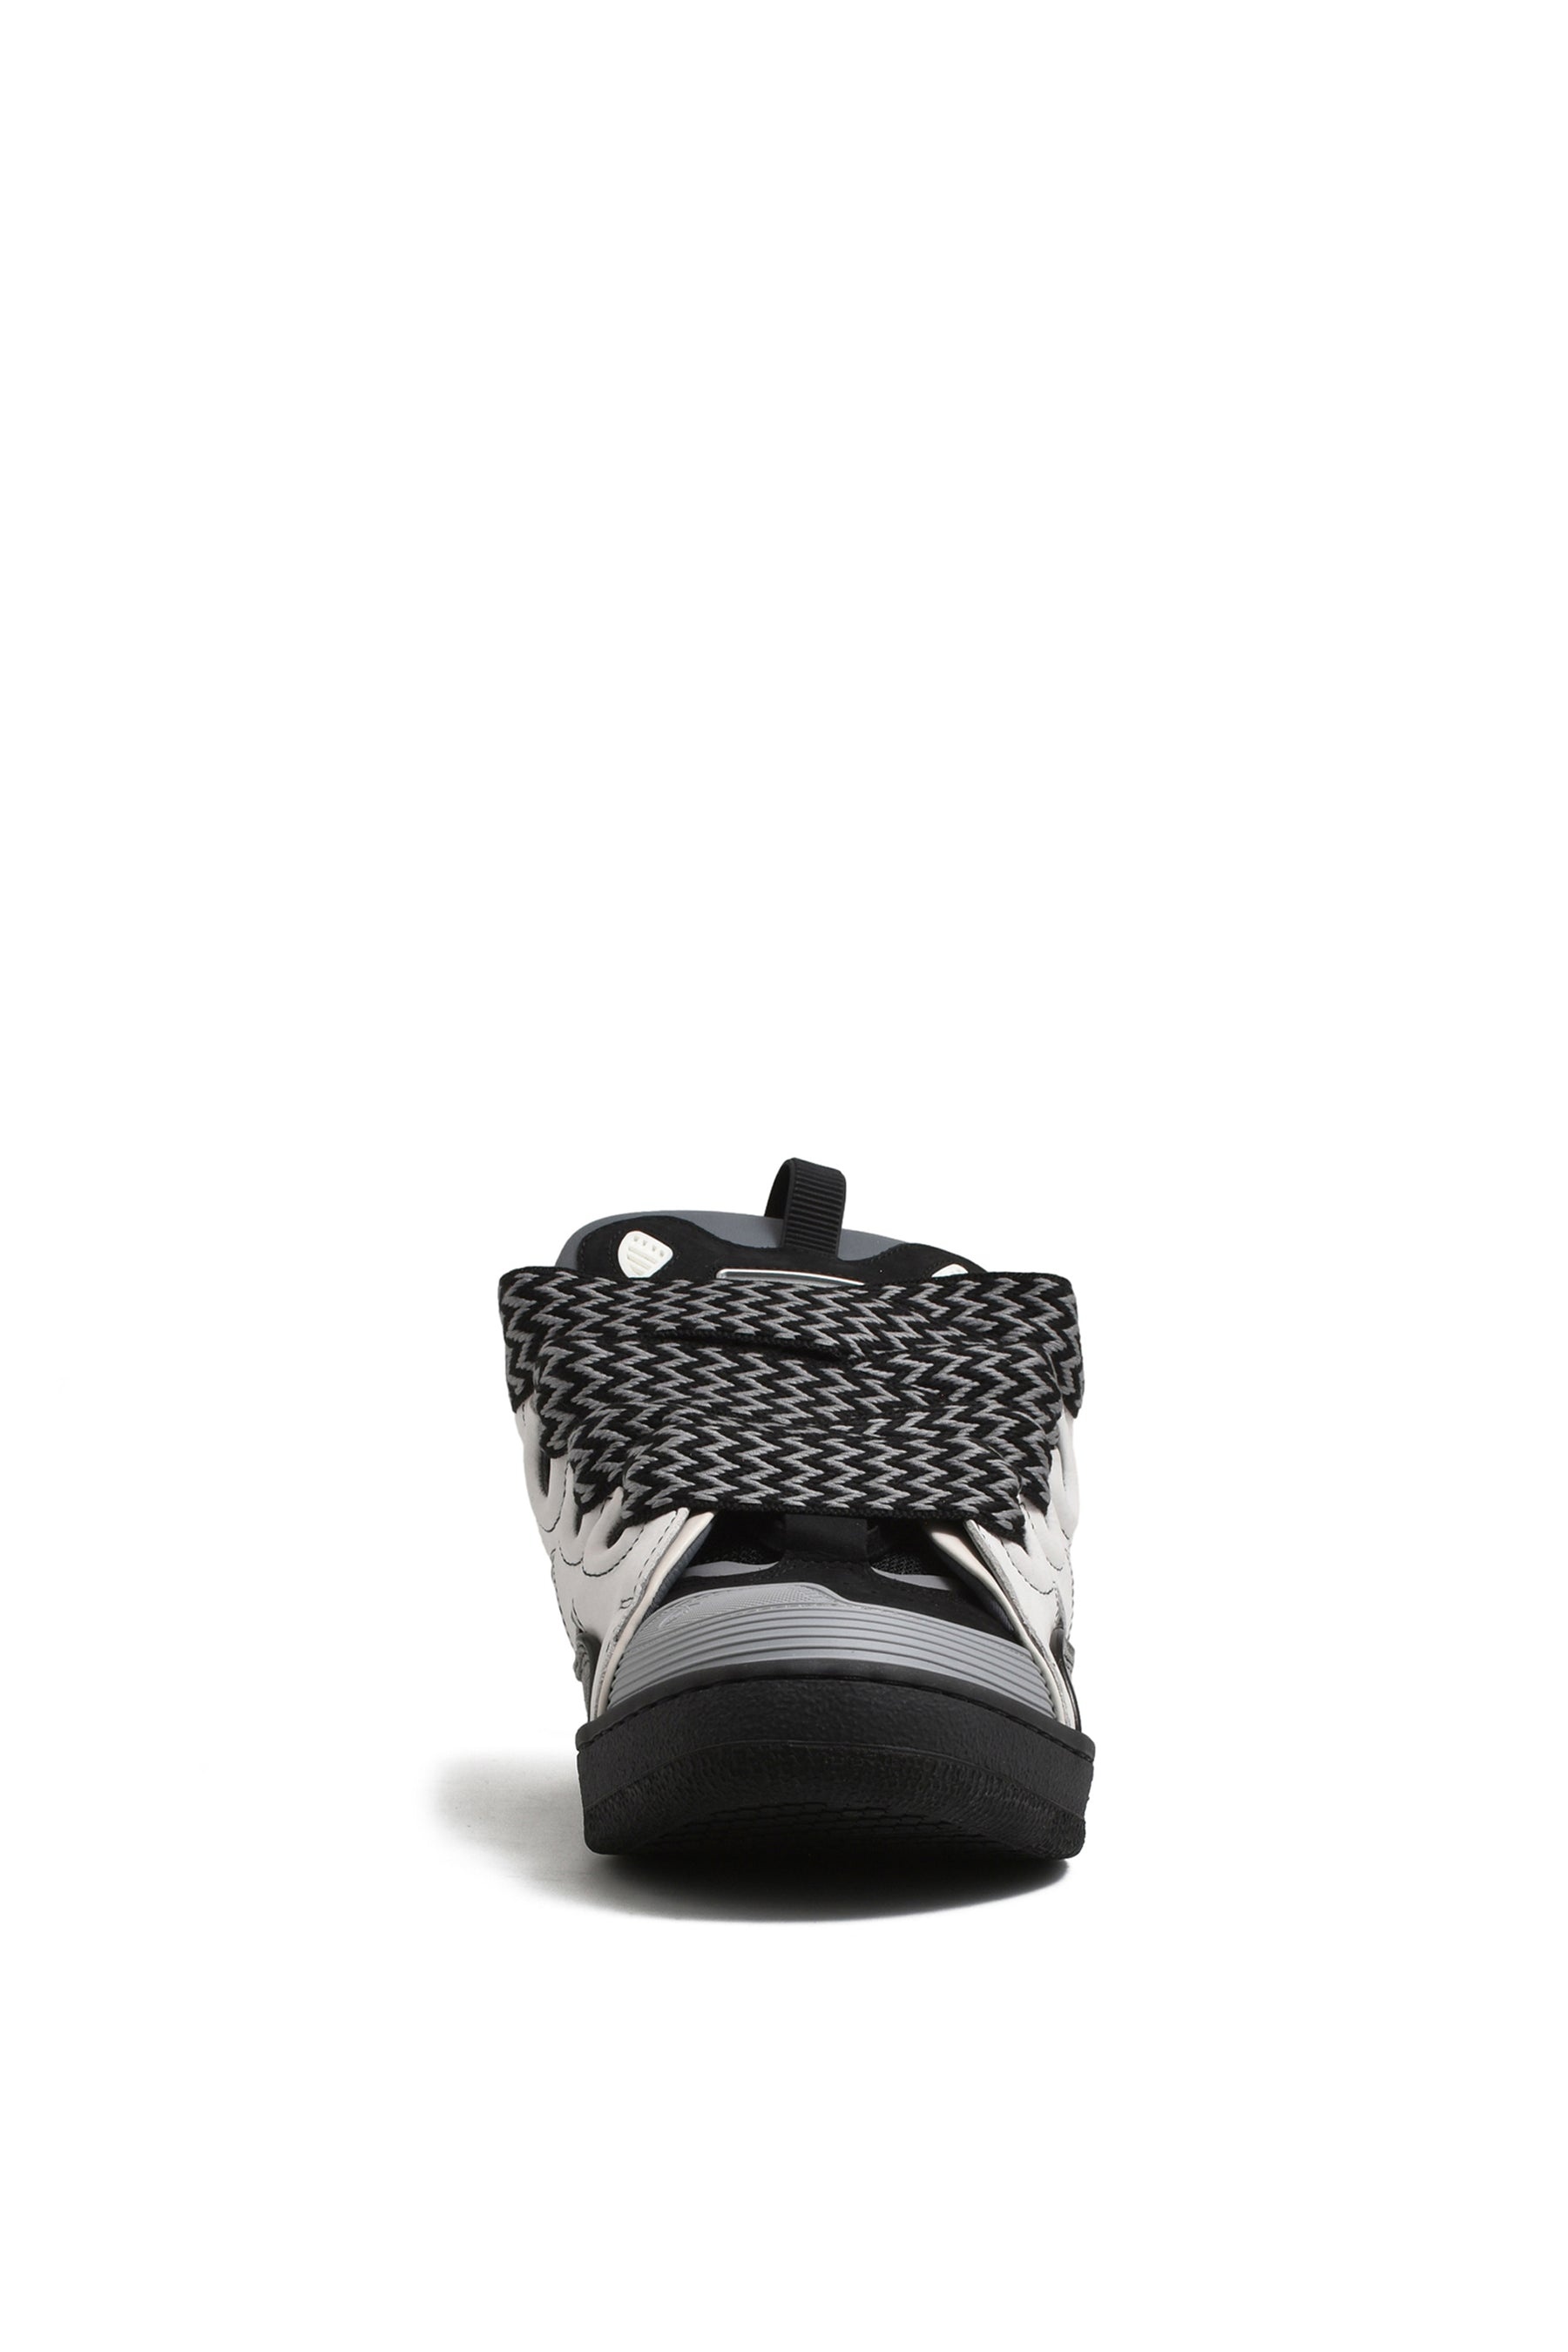 CURB SNEAKERS / BLK WHT - 3